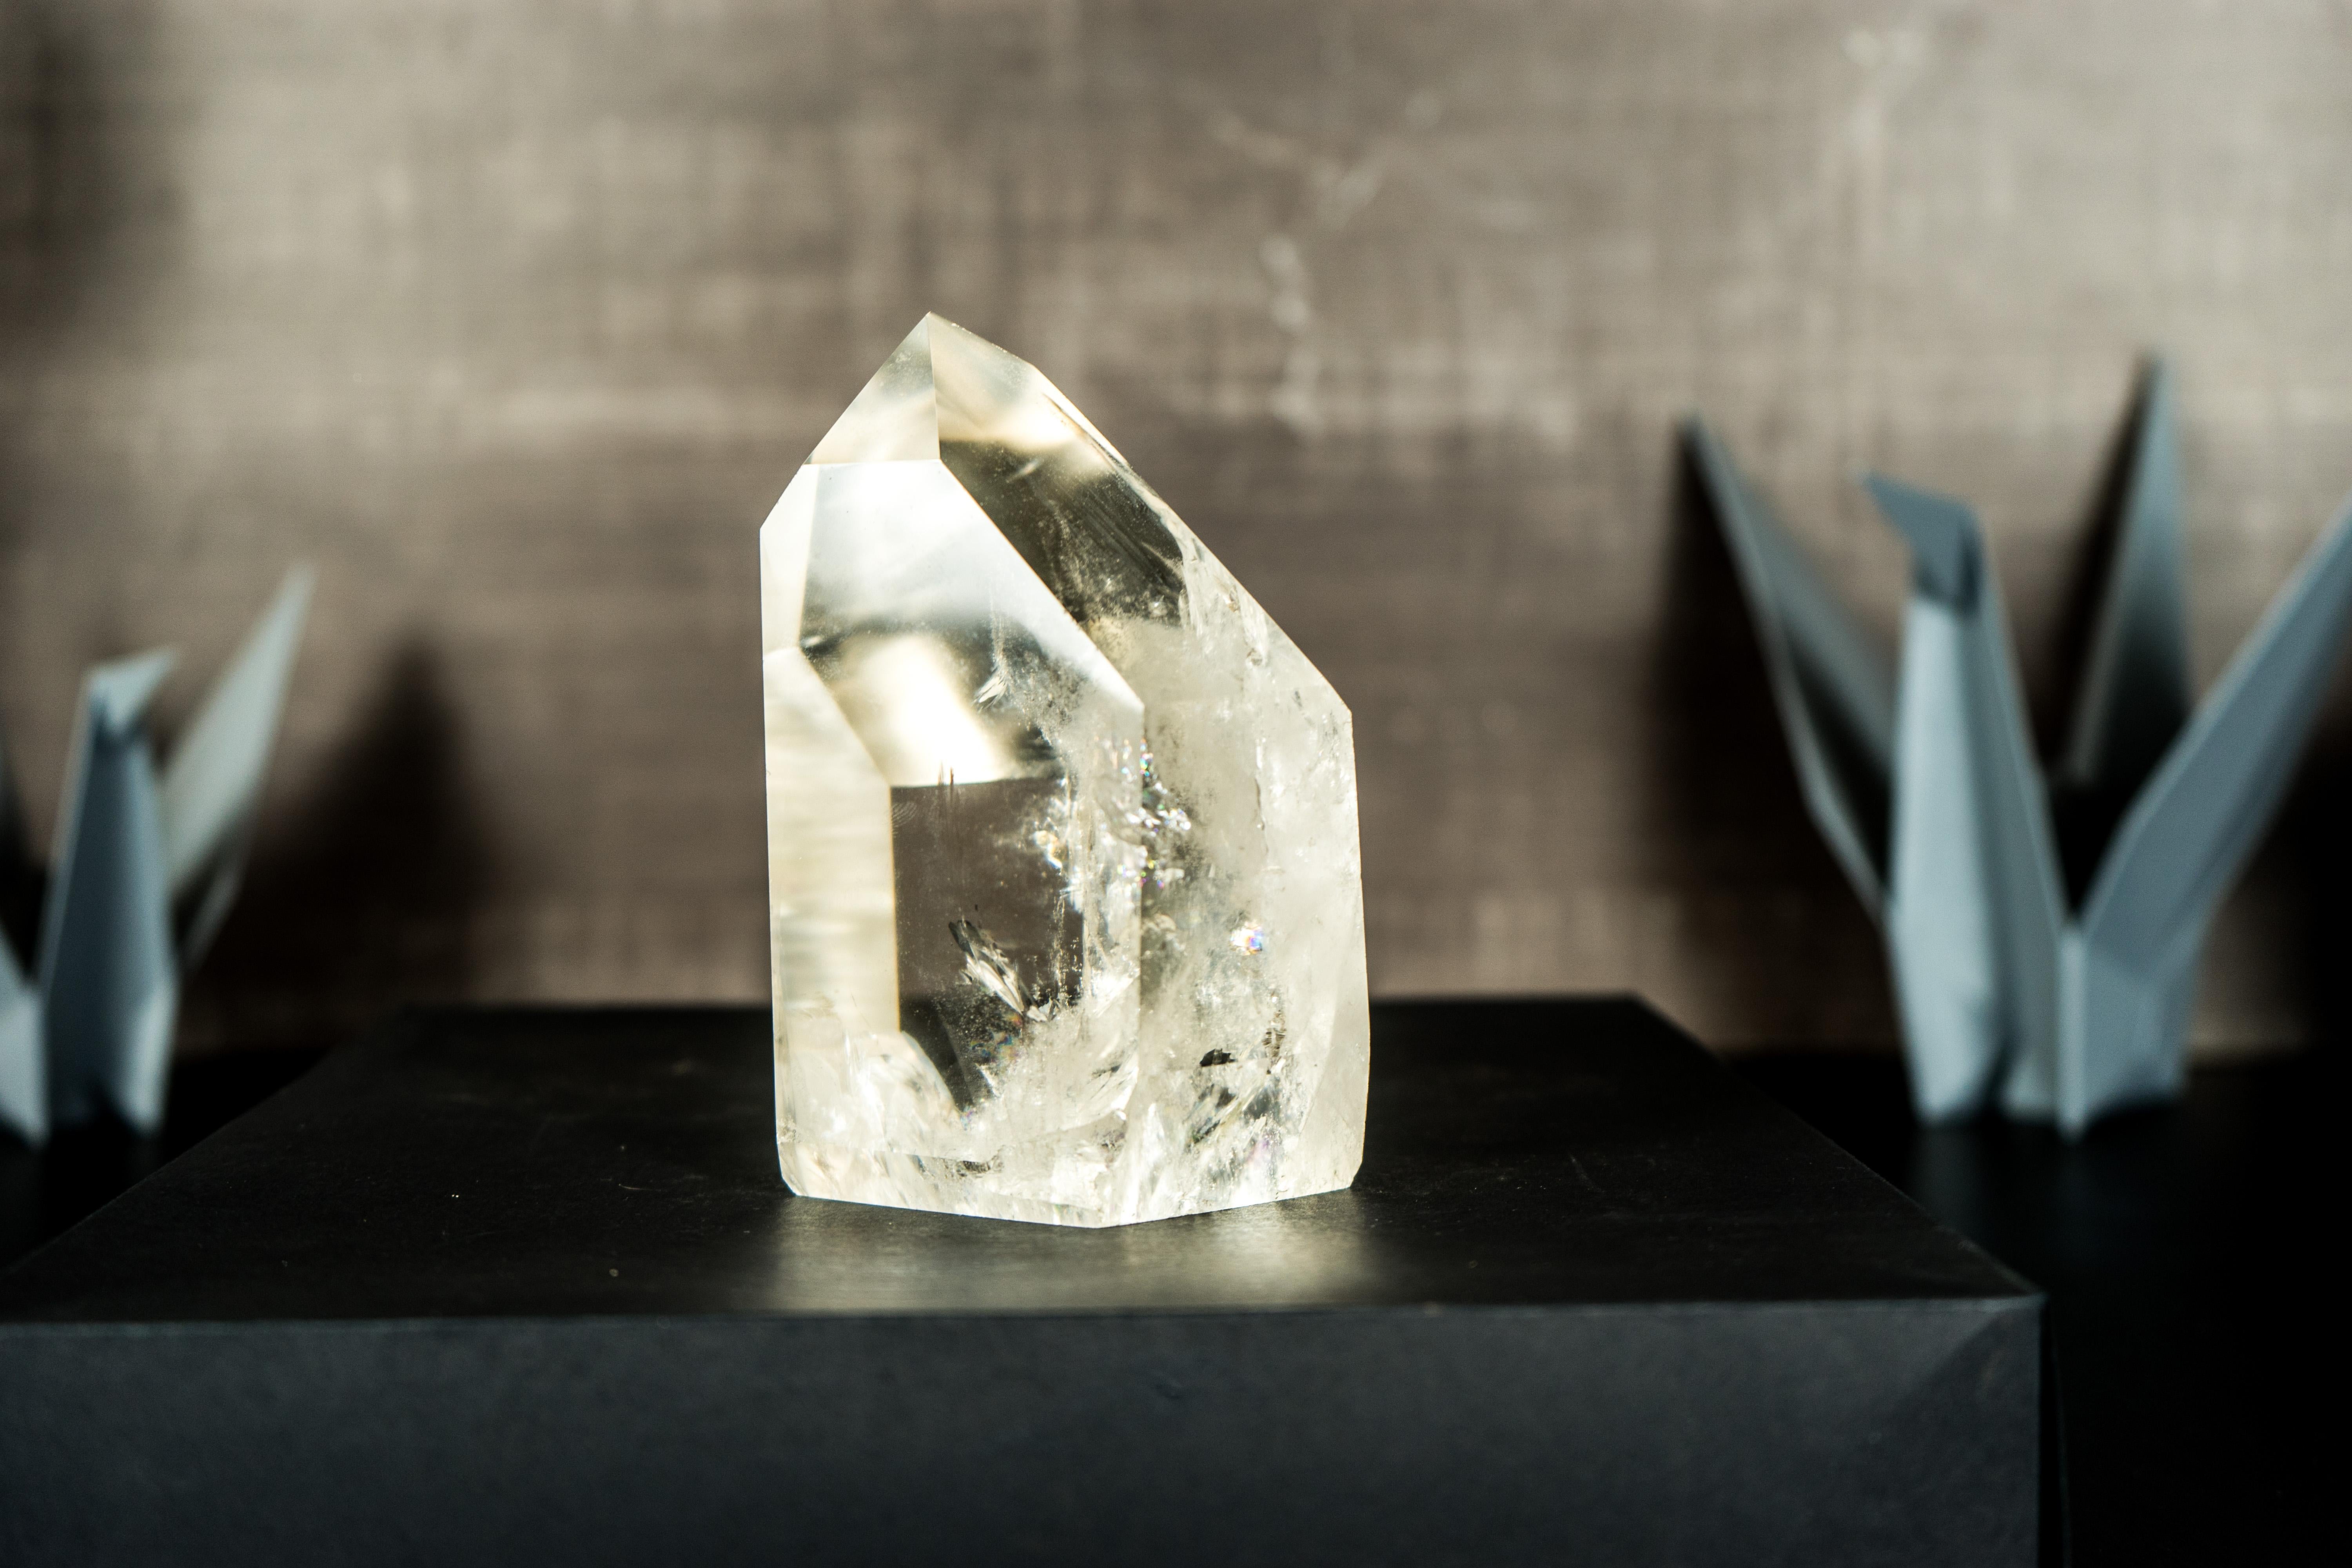 Showcasing stunning aesthetics, this Clear Quartz Obelisk point features unparalleled water-clear transparency and highly skilled craftsmanship, making it a masterpiece of natural artistry. It is an AAA Crystal Point from Diamantina that not only